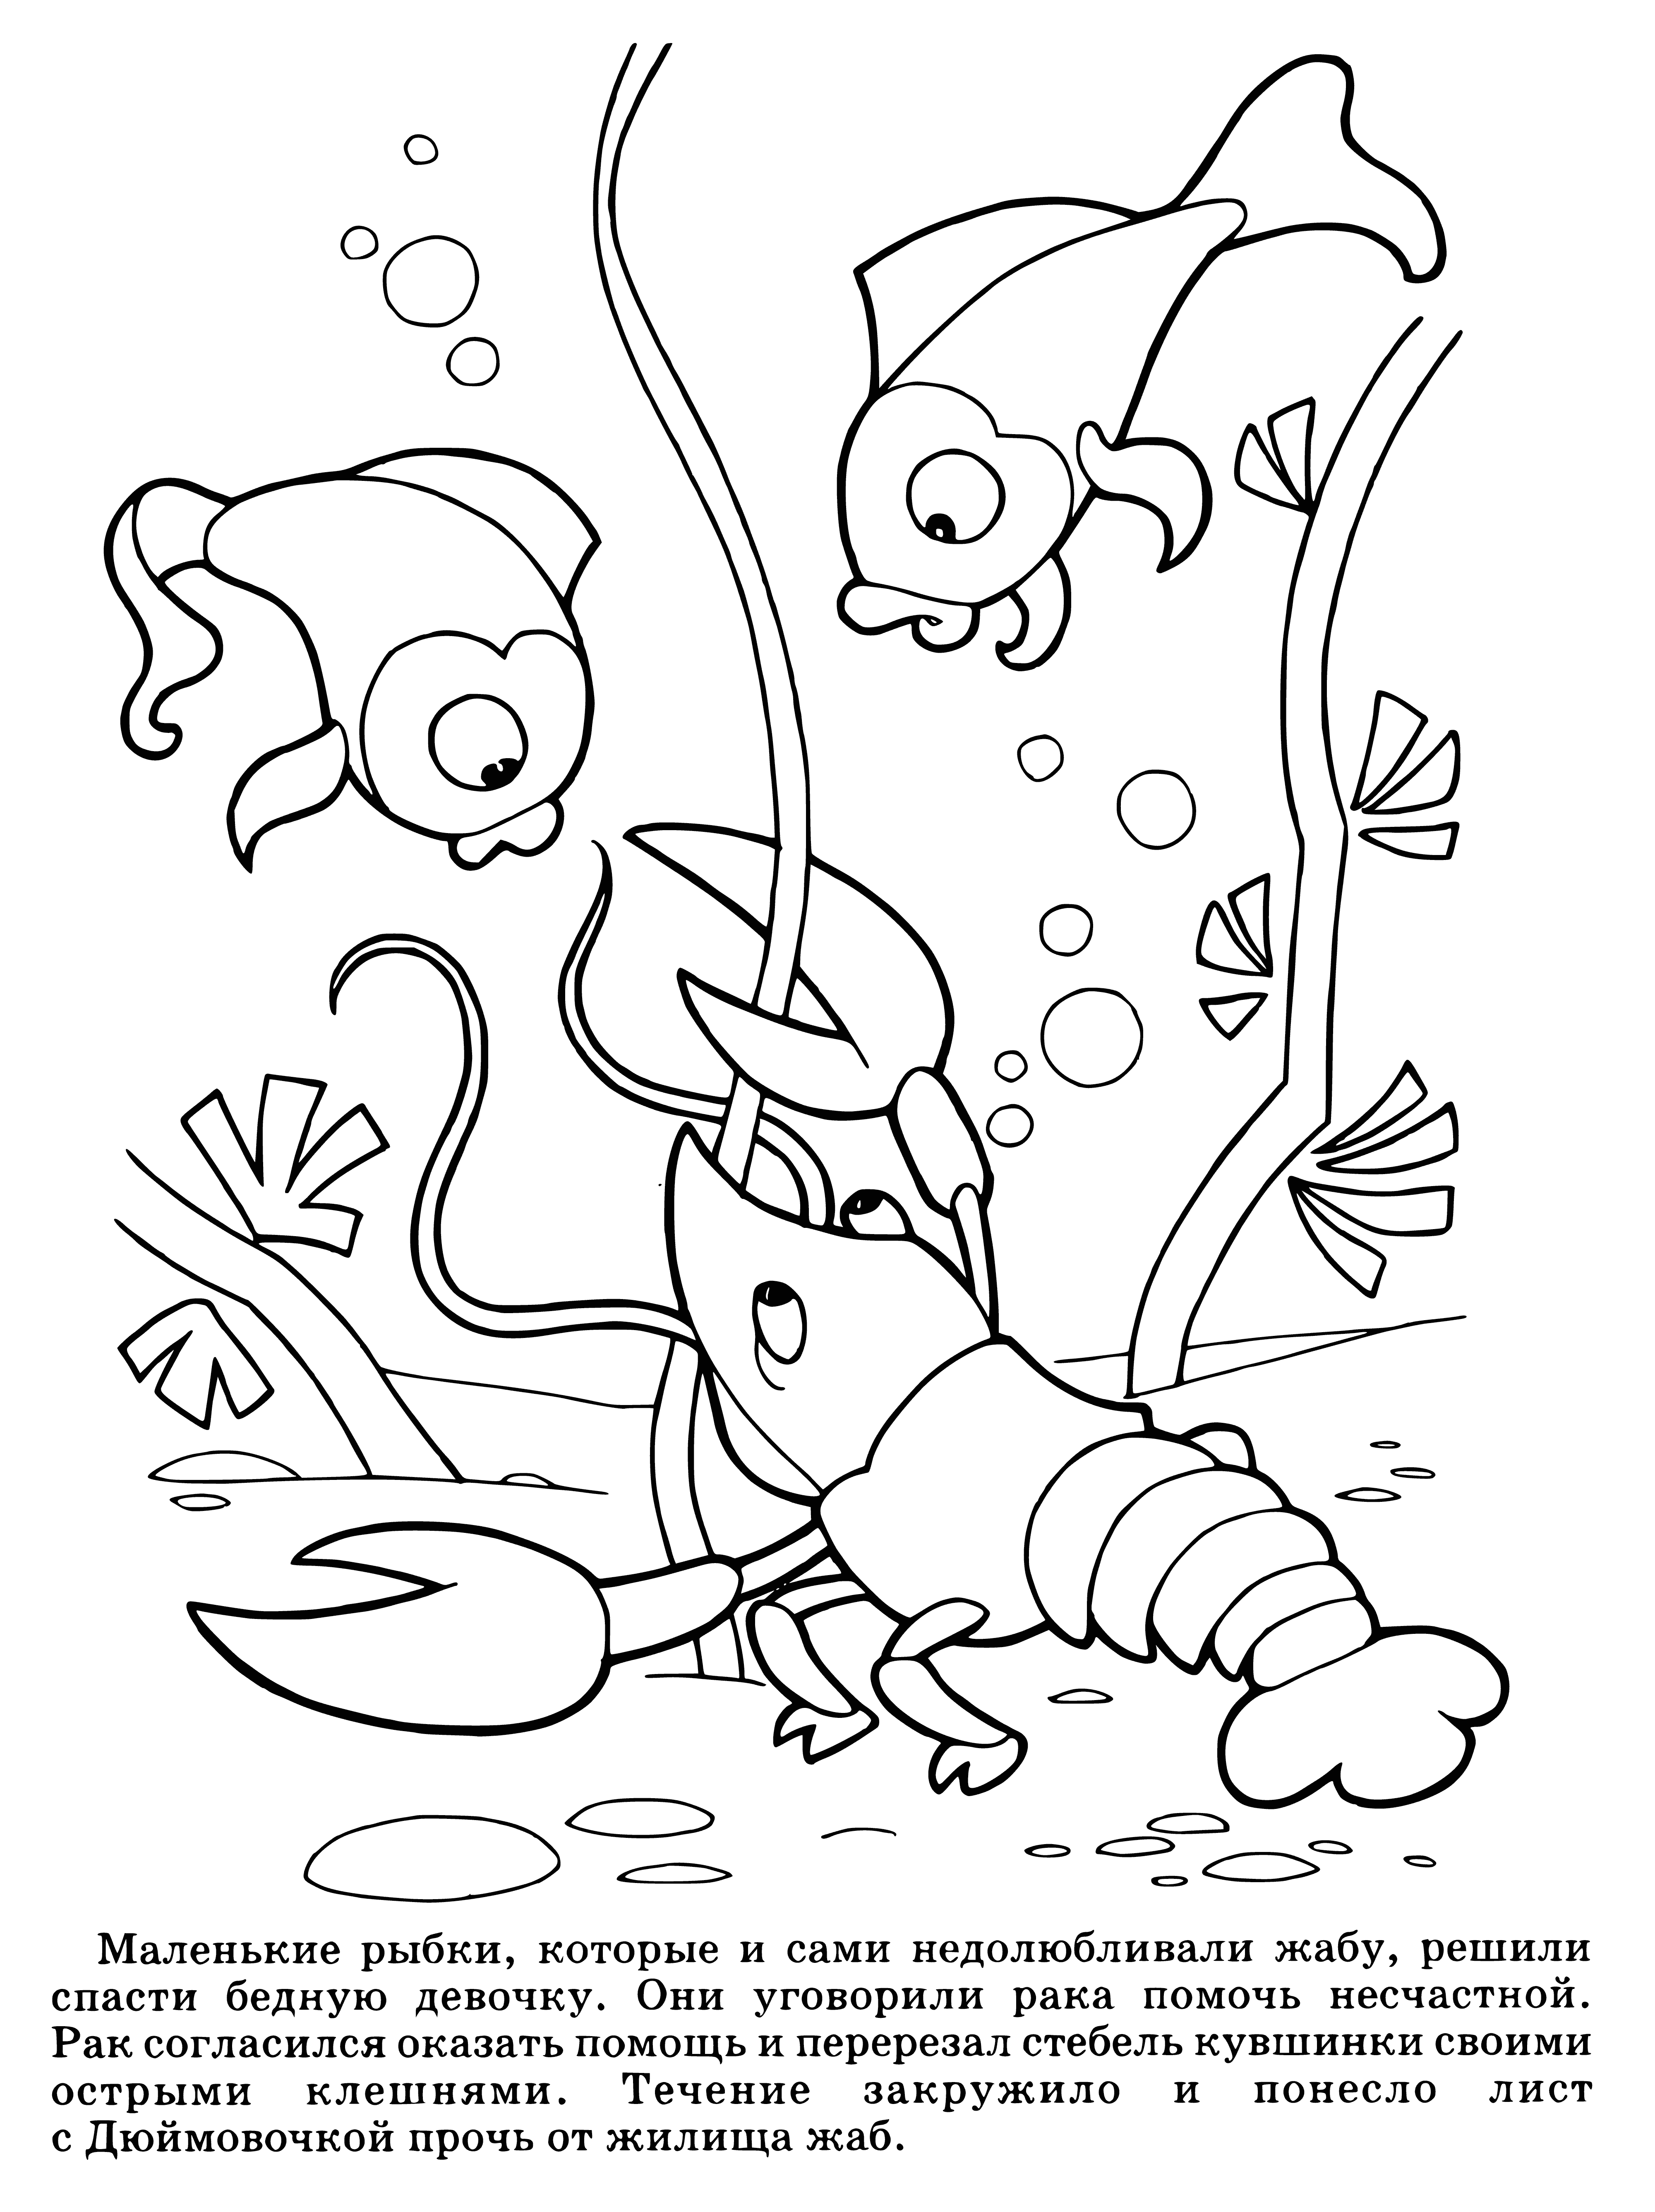 coloring page: Large white water lily in calm pool with dark crab cutting its petal with claws.